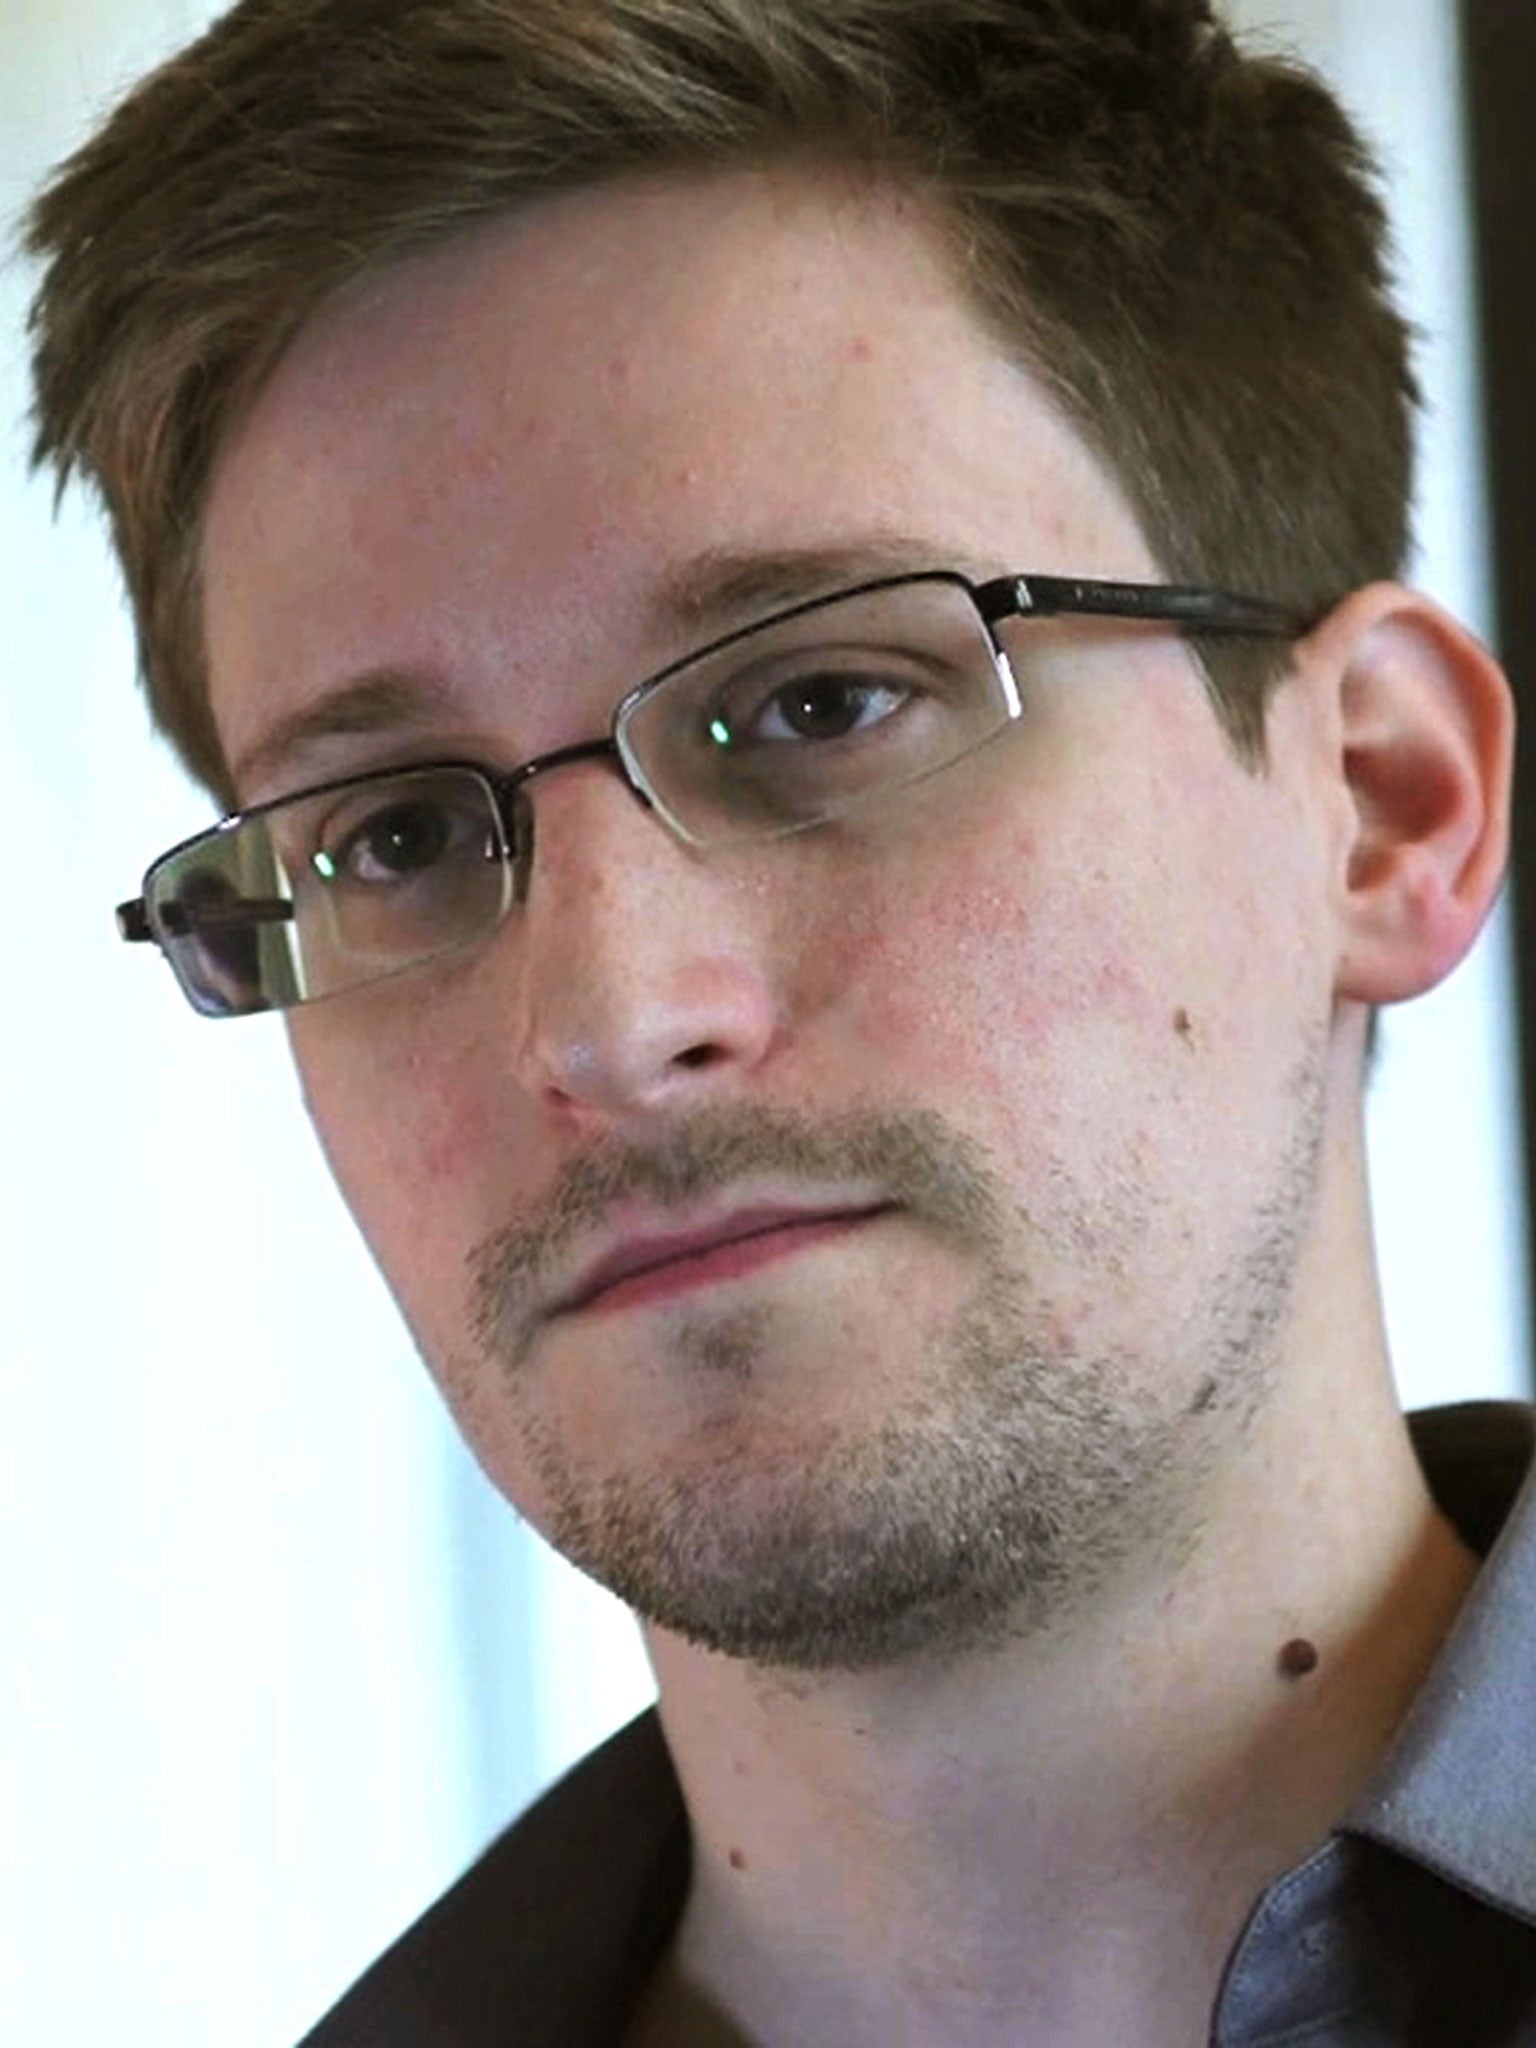 Edward Snowden claims he will face torture or the death penalty should he return to the US